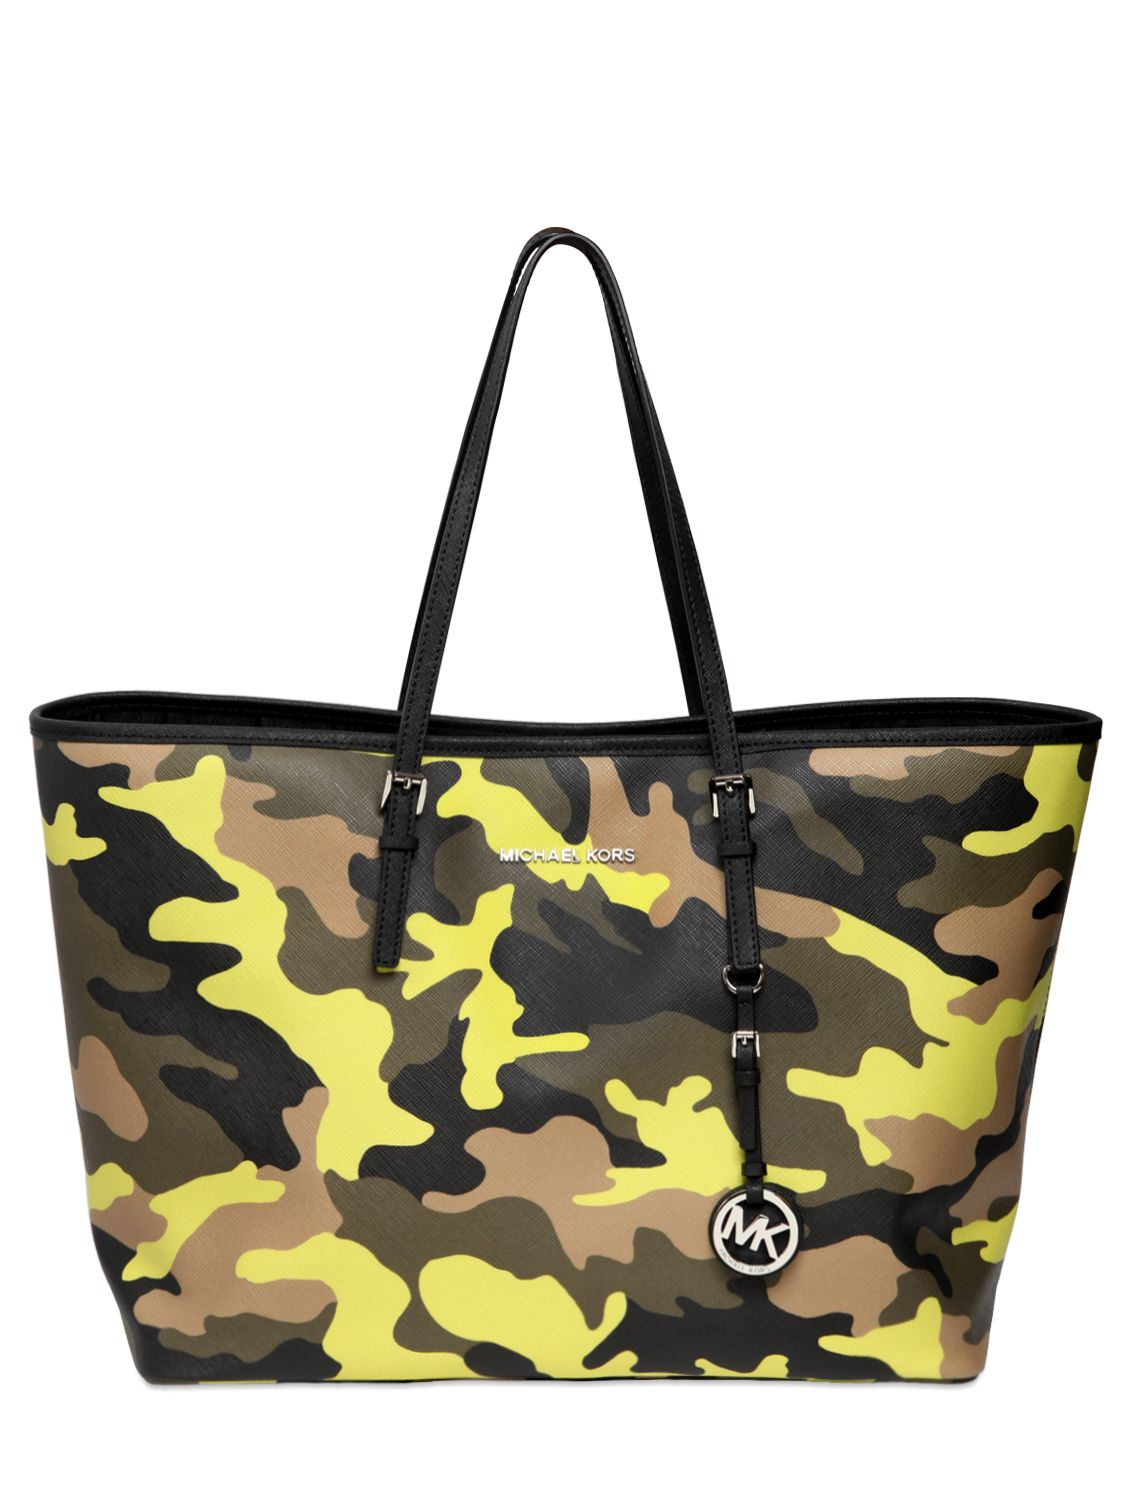 Michael Kors Army Green Tote - Army Military